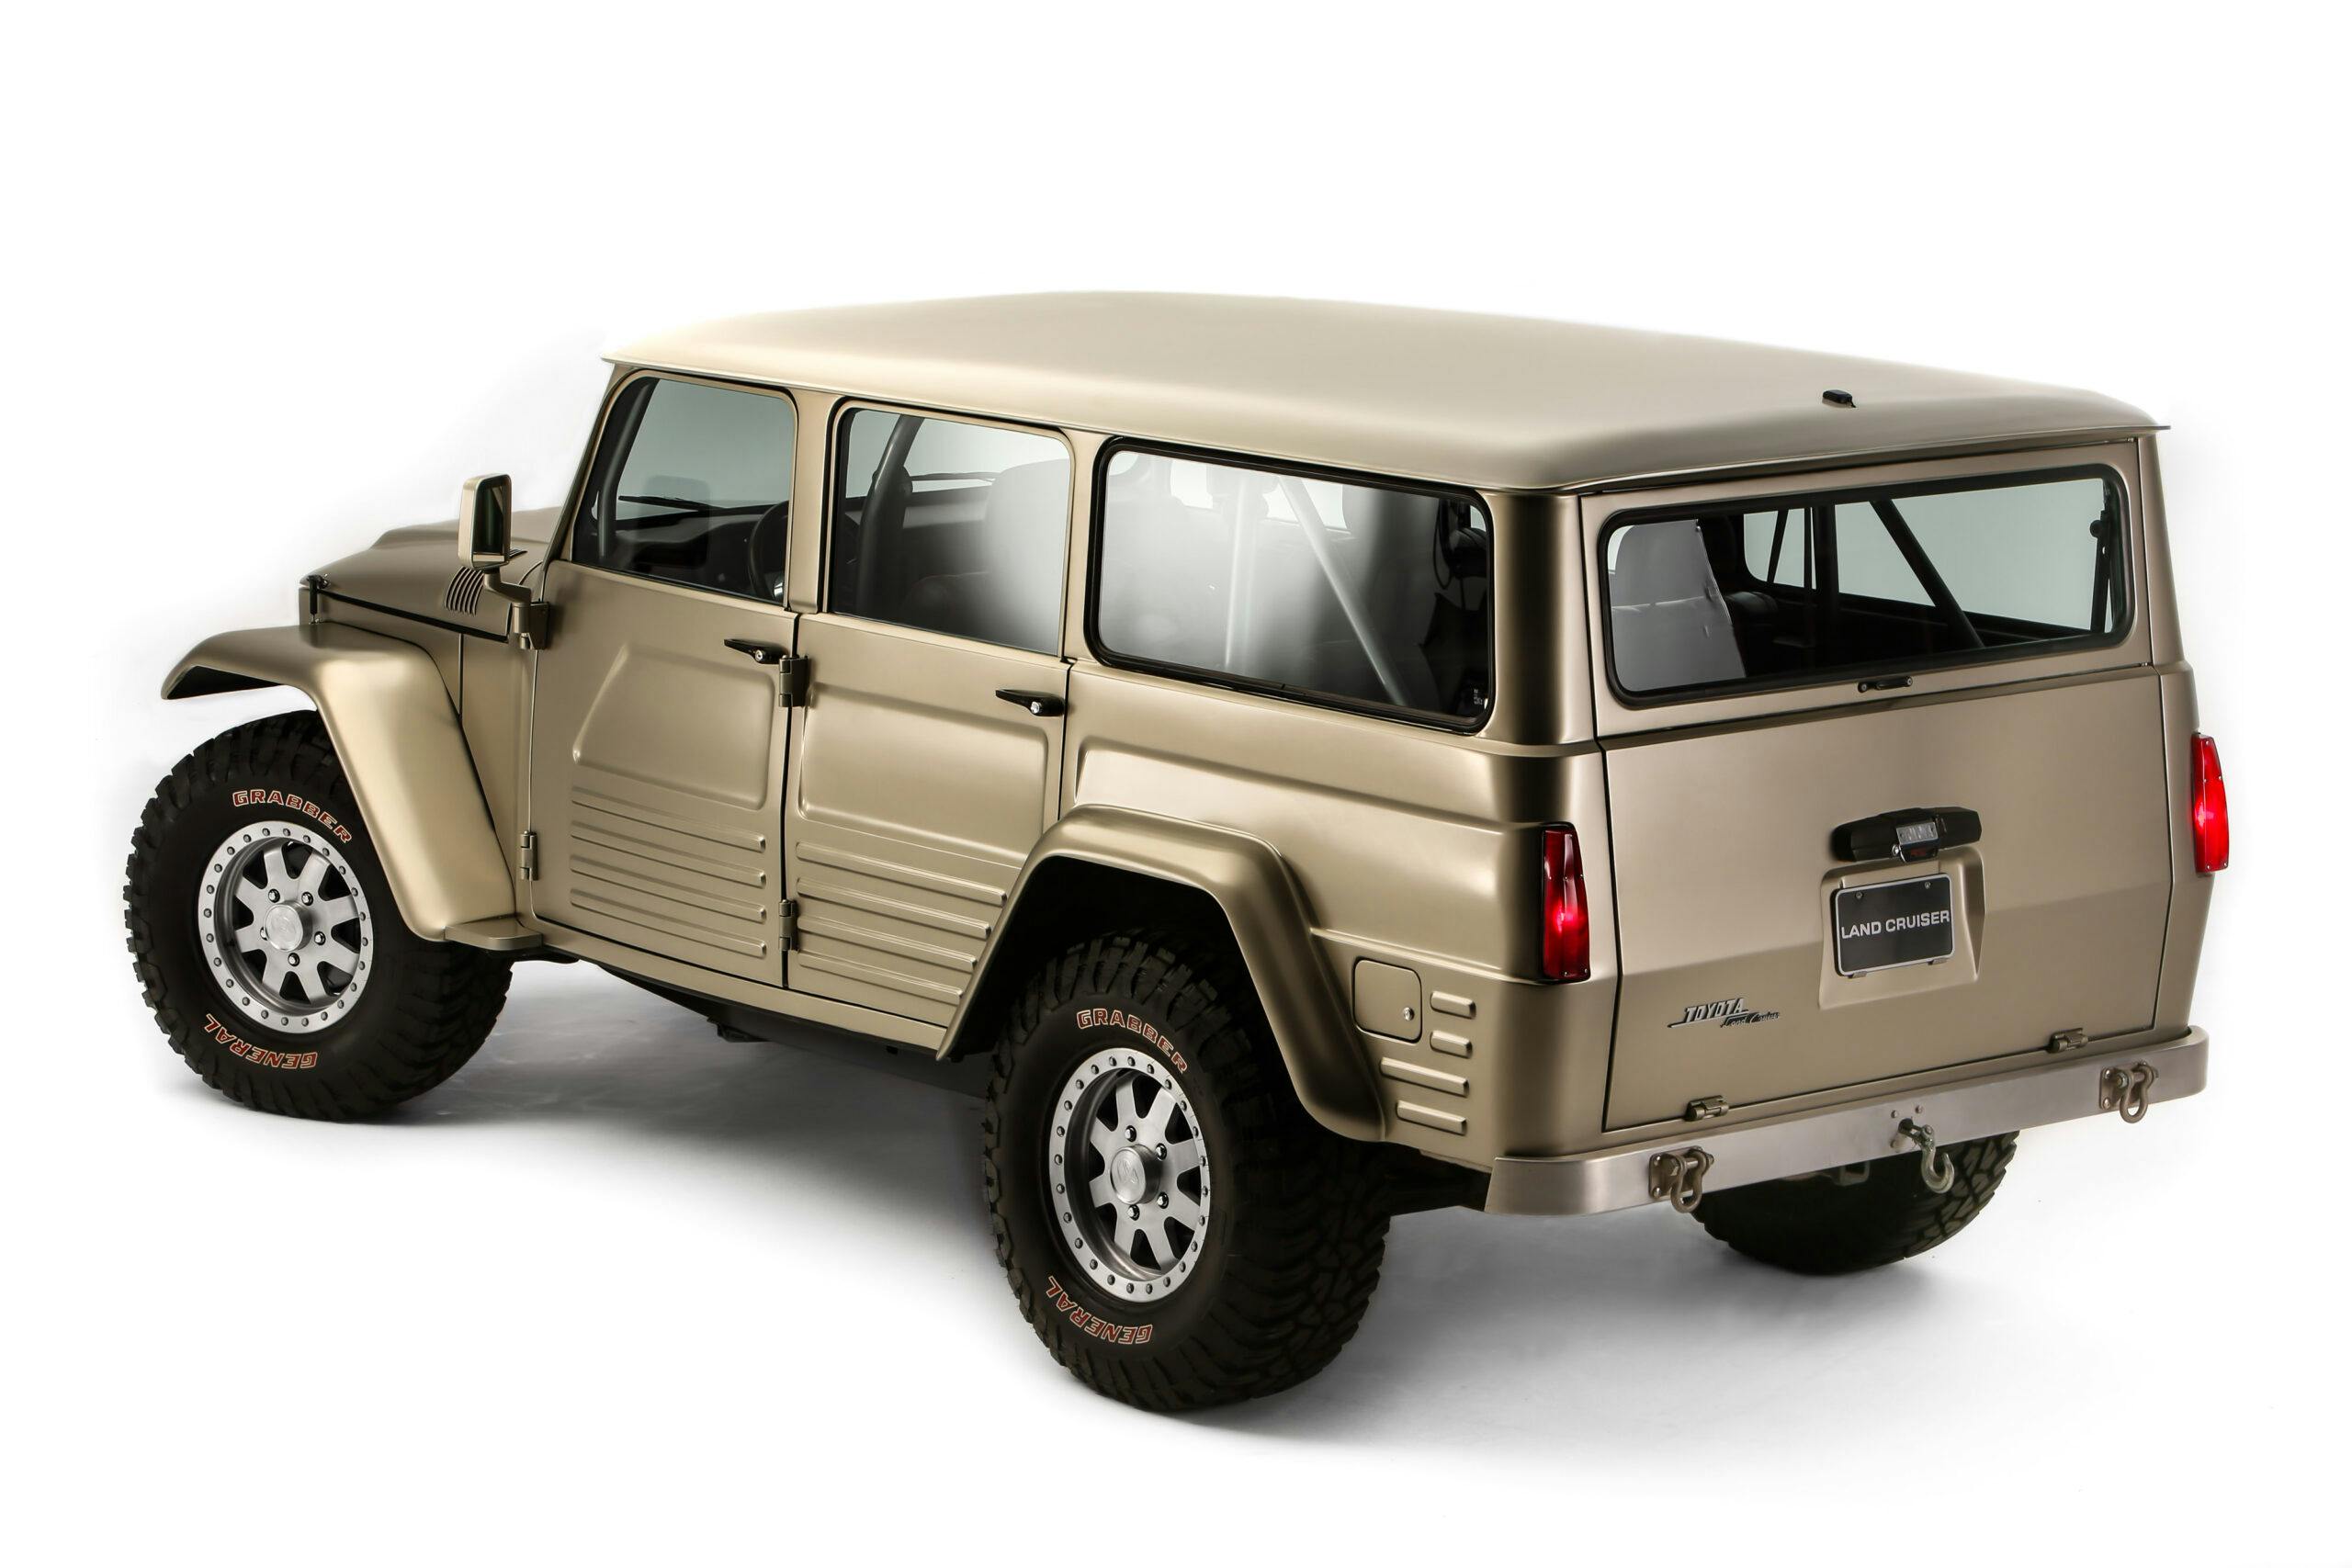 The Toyota Land Cruiser History: How It Evolved, Why People Love